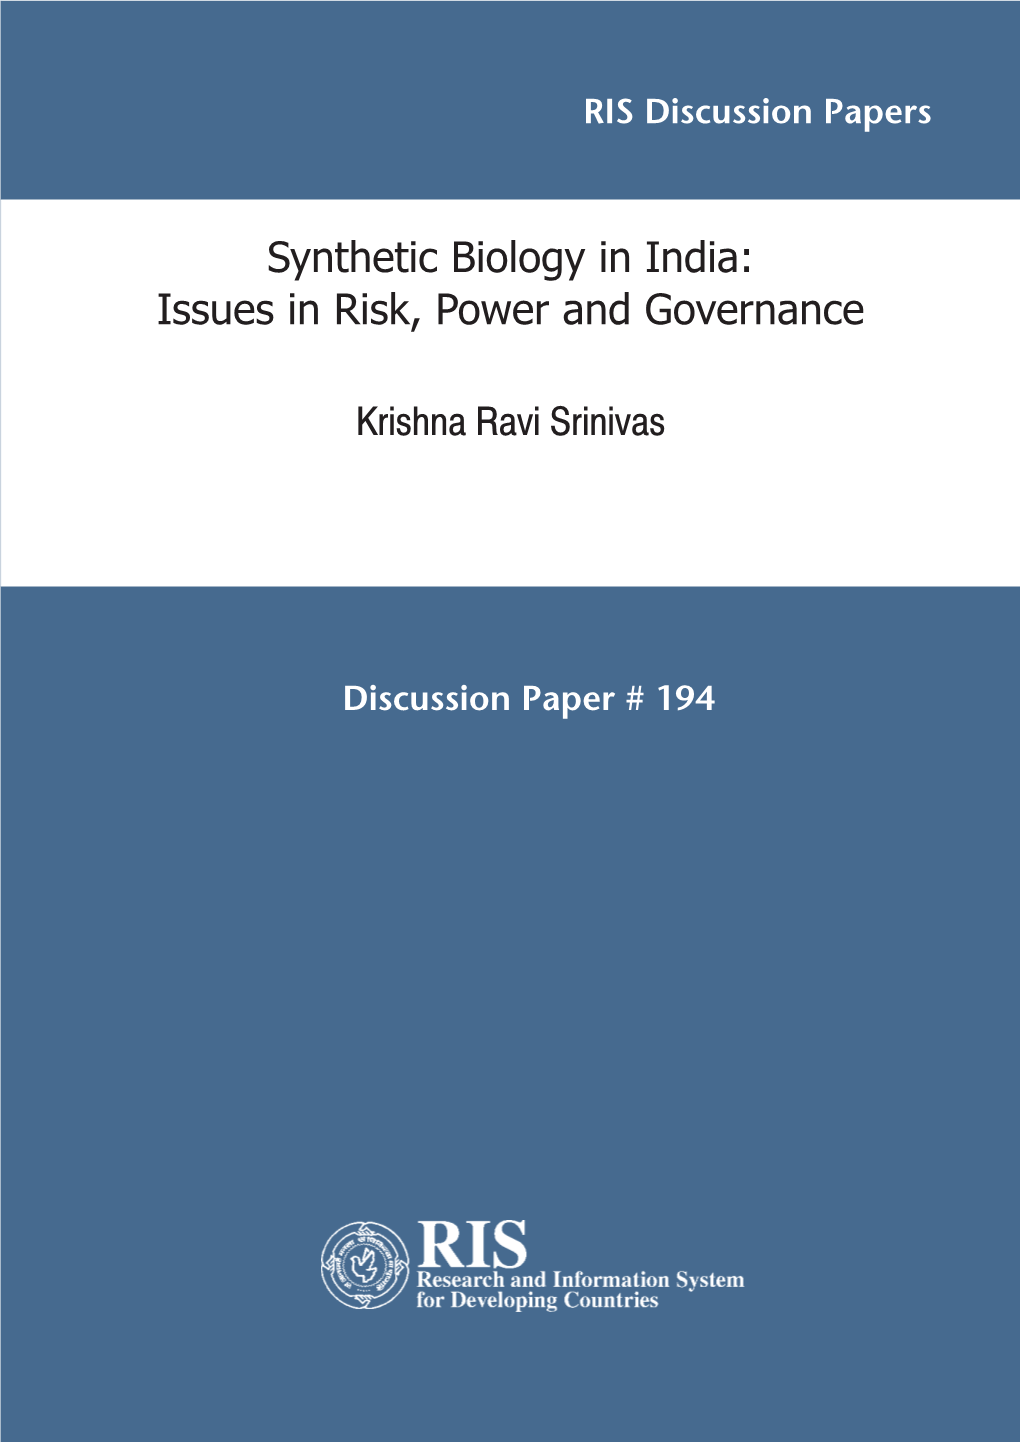 Synthetic Biology in India: Issues in Risk, Power and Governance